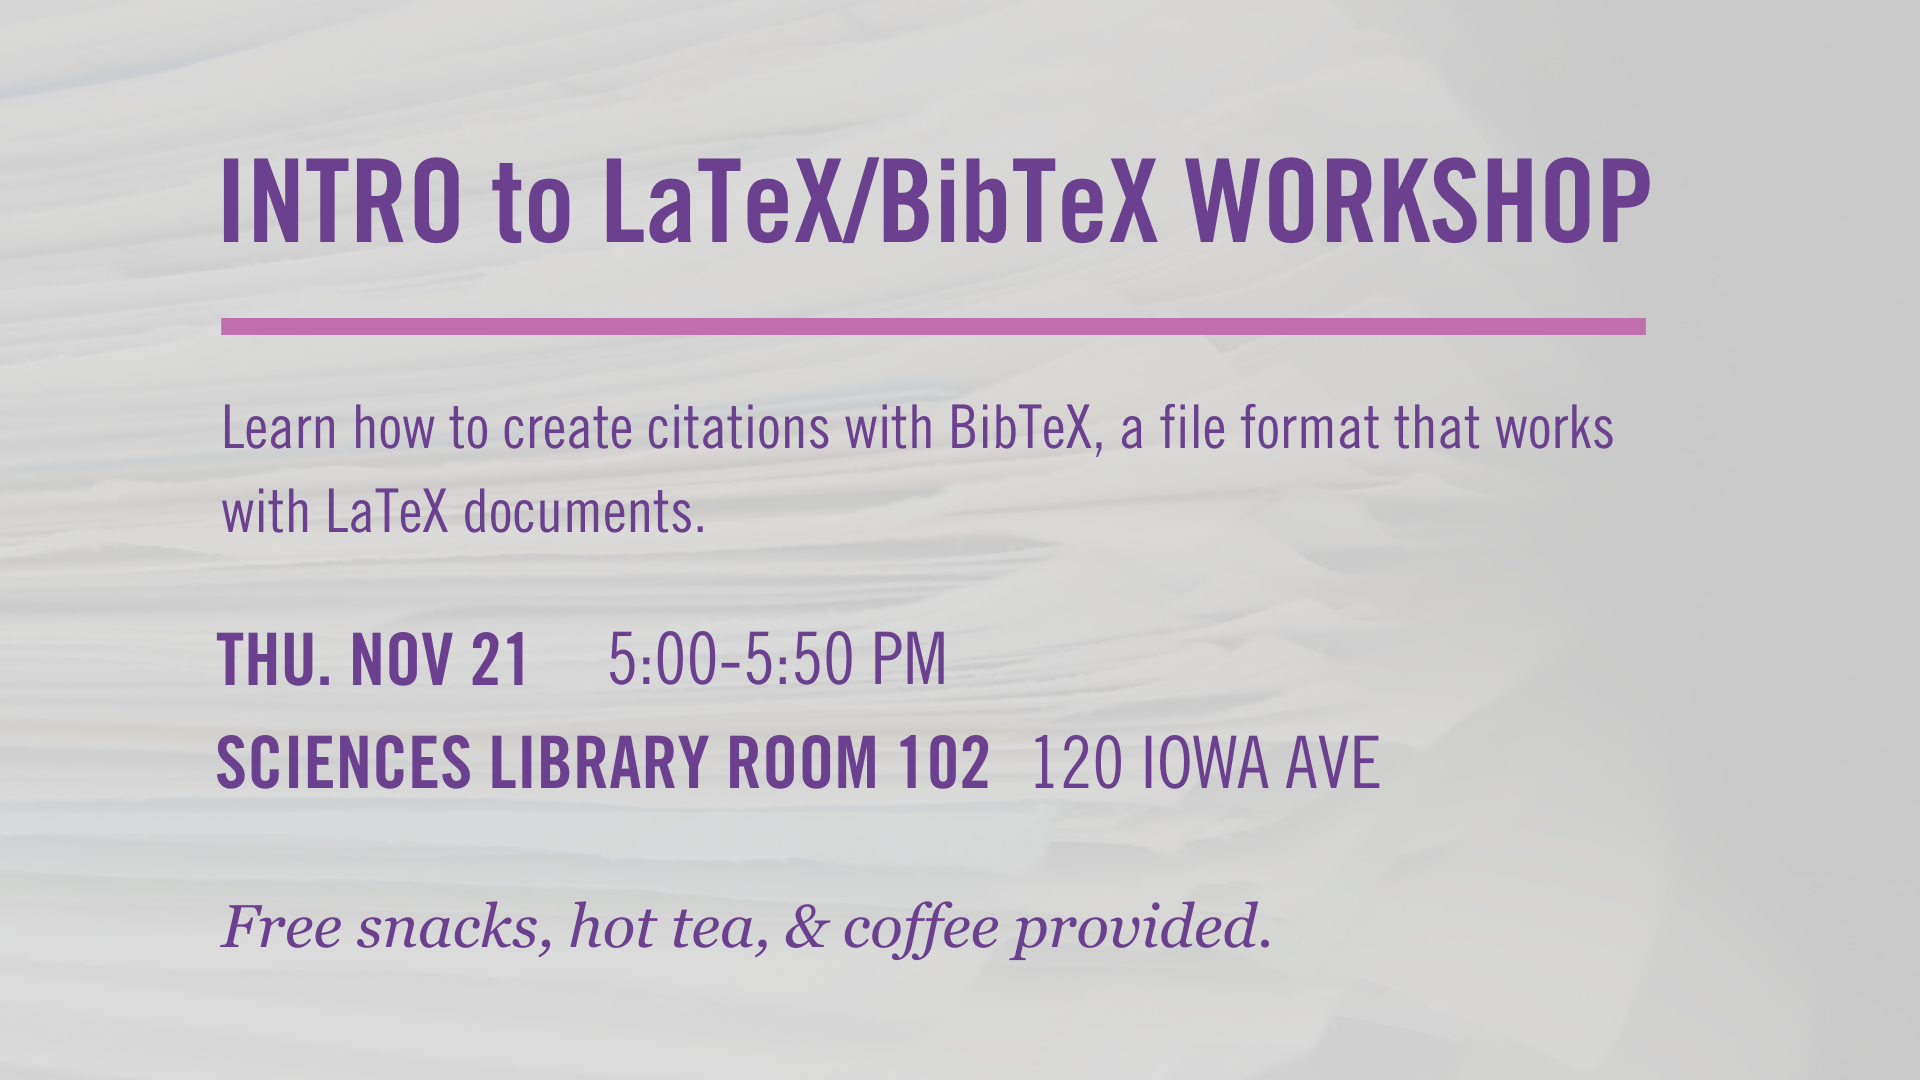 Intro to LaTeX/BibTeX workshop. Learn how to create citations with BibTeX, a file format that works with LaTeX documents. Thursday, November 21, 5-5:50 PM, Sciences Library room 102, 120 Iowa Ave. Free snacks, hot tea, and coffee provided.